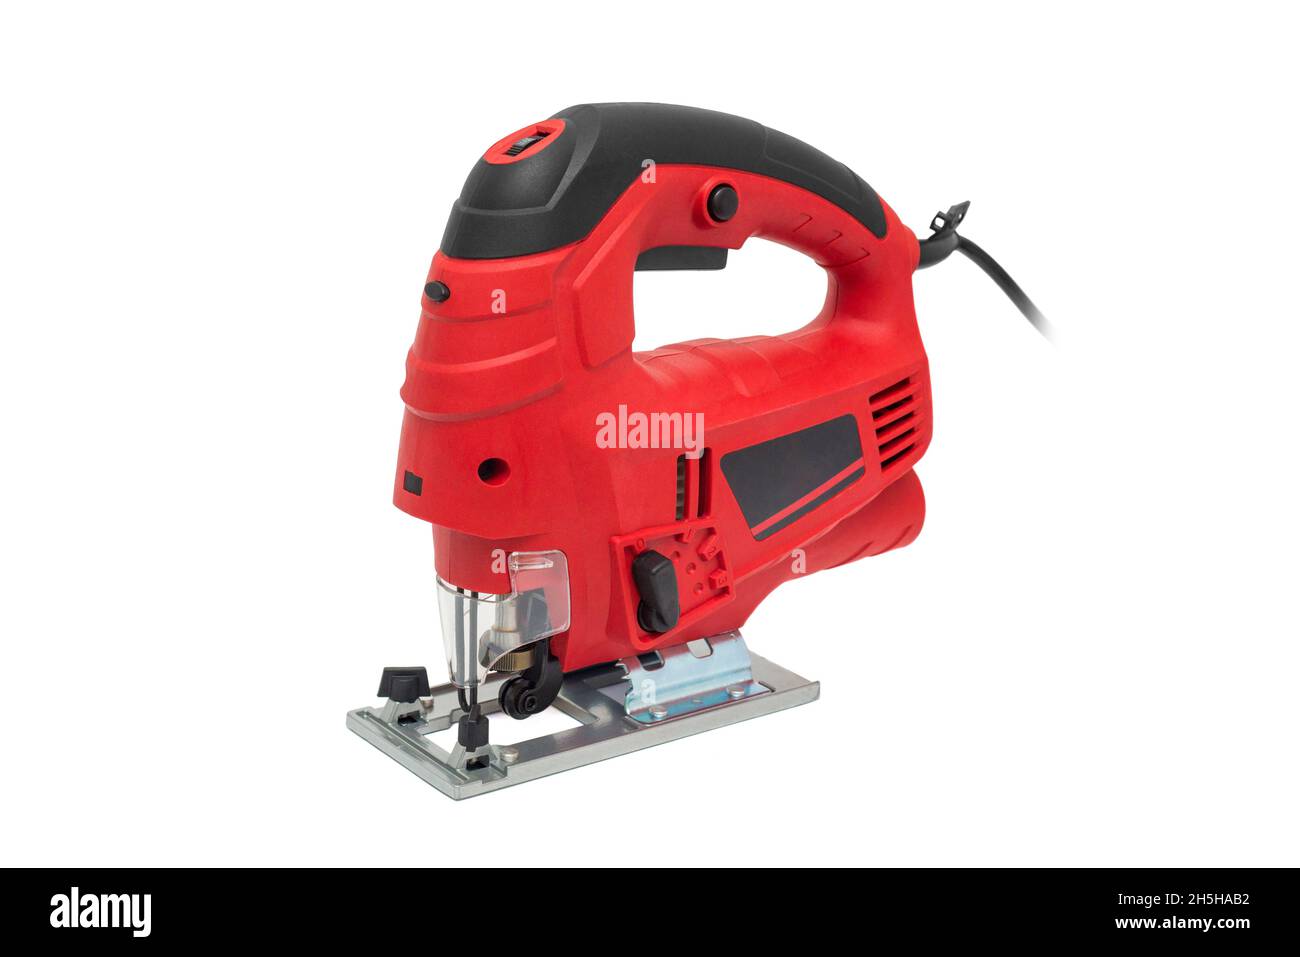 A jigsaw power tool isolated on white background. Electric jig saw. Professional electric jig saw isolated on white background. Electric fretsaw on a Stock Photo